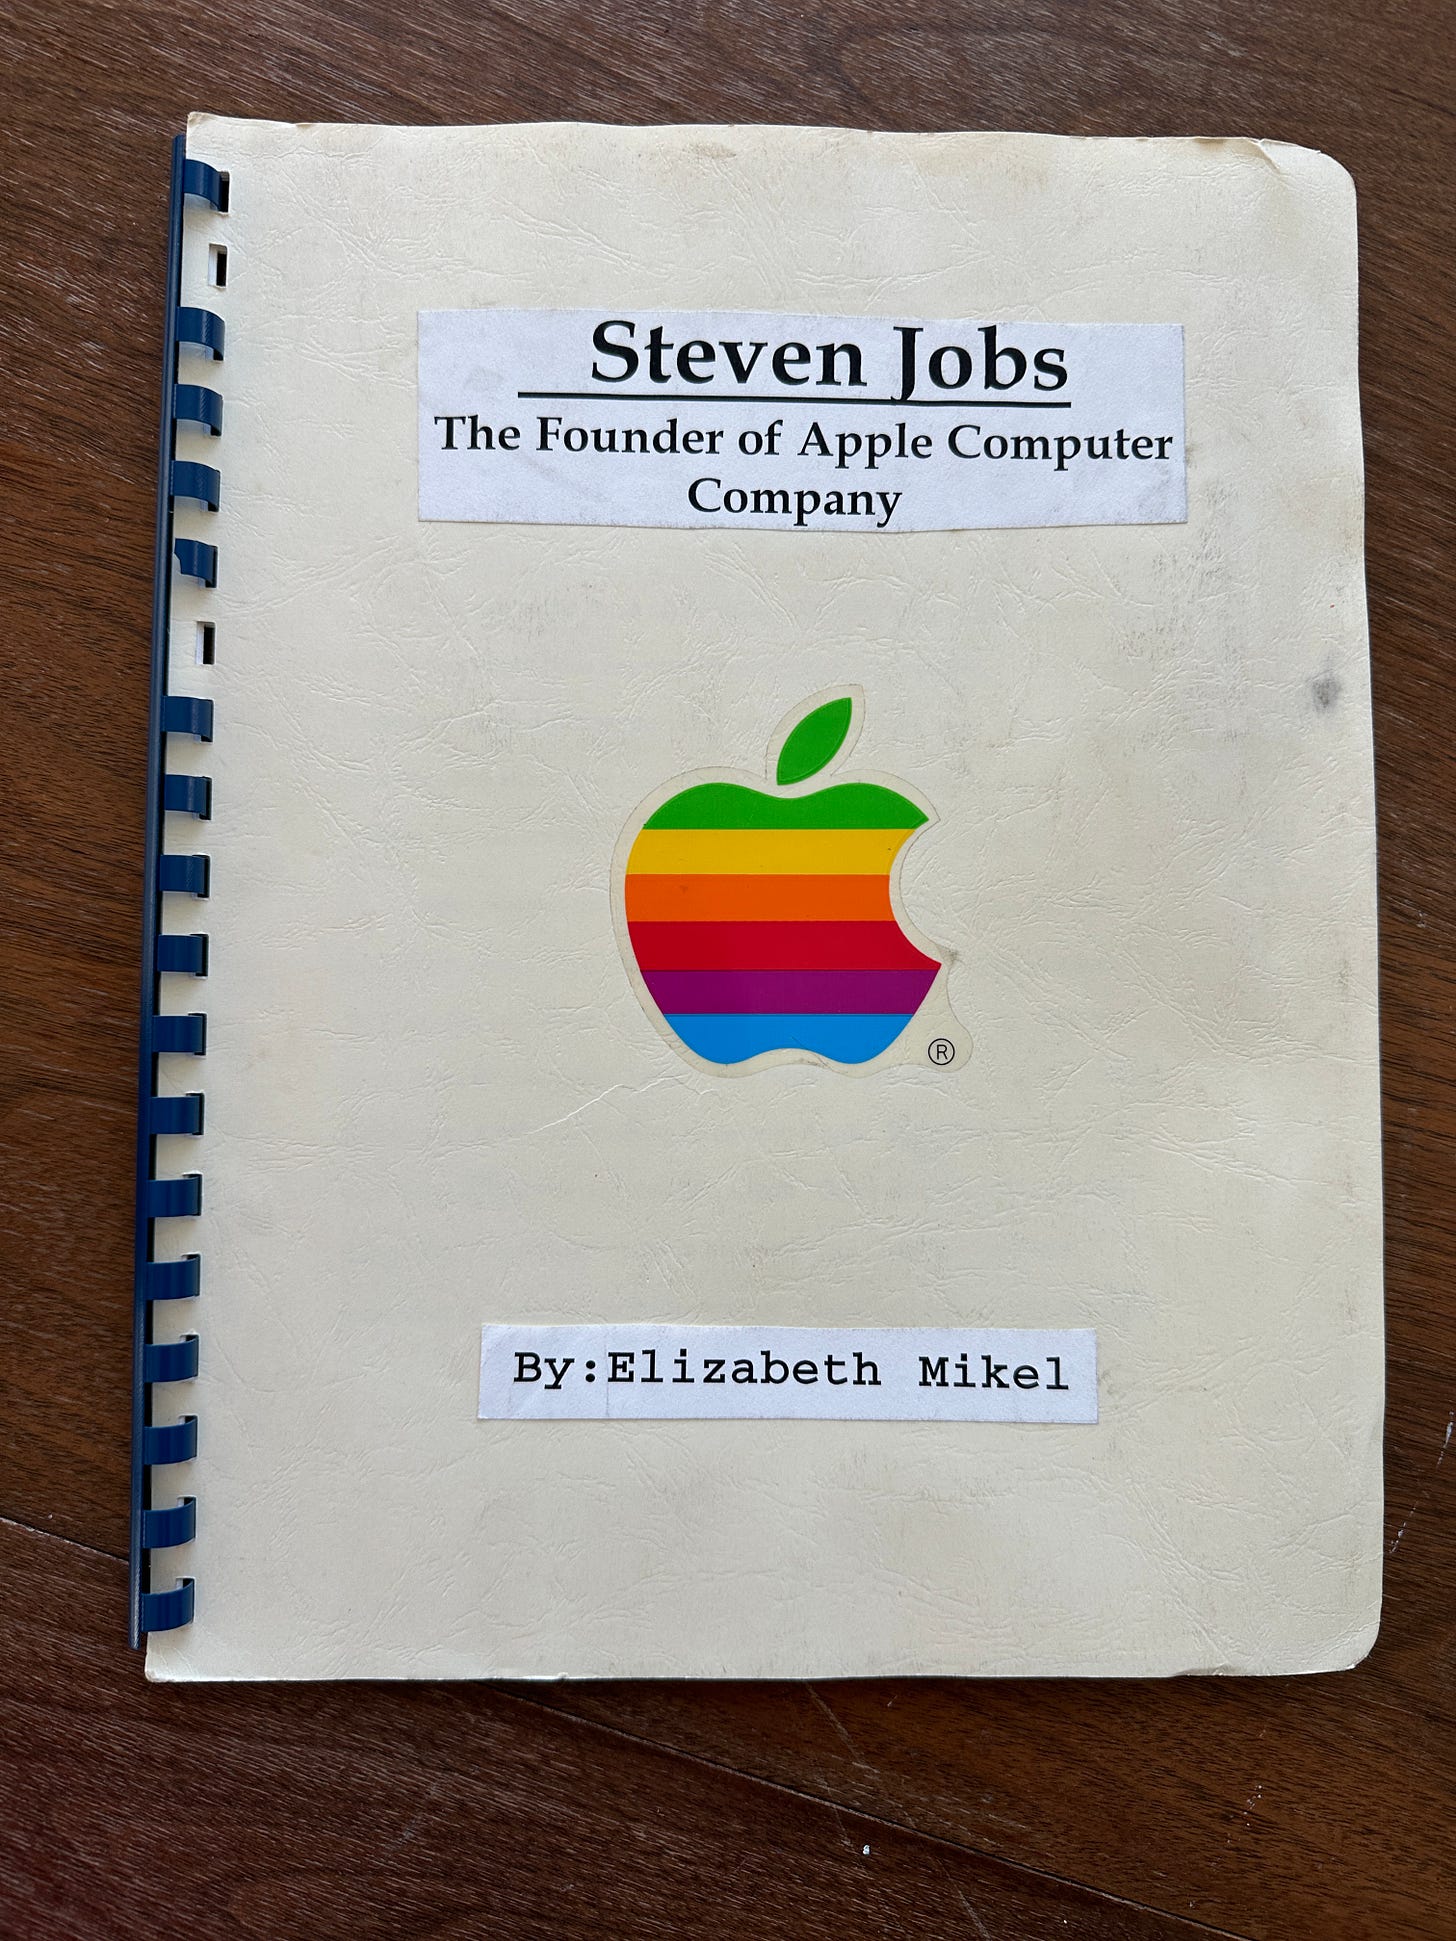 Tan bound report with plastic binding. Has Apple sticker on the front. Title reads "Steven Jobs The Found of Apple Computer Company" by Elizabeth Mikel.